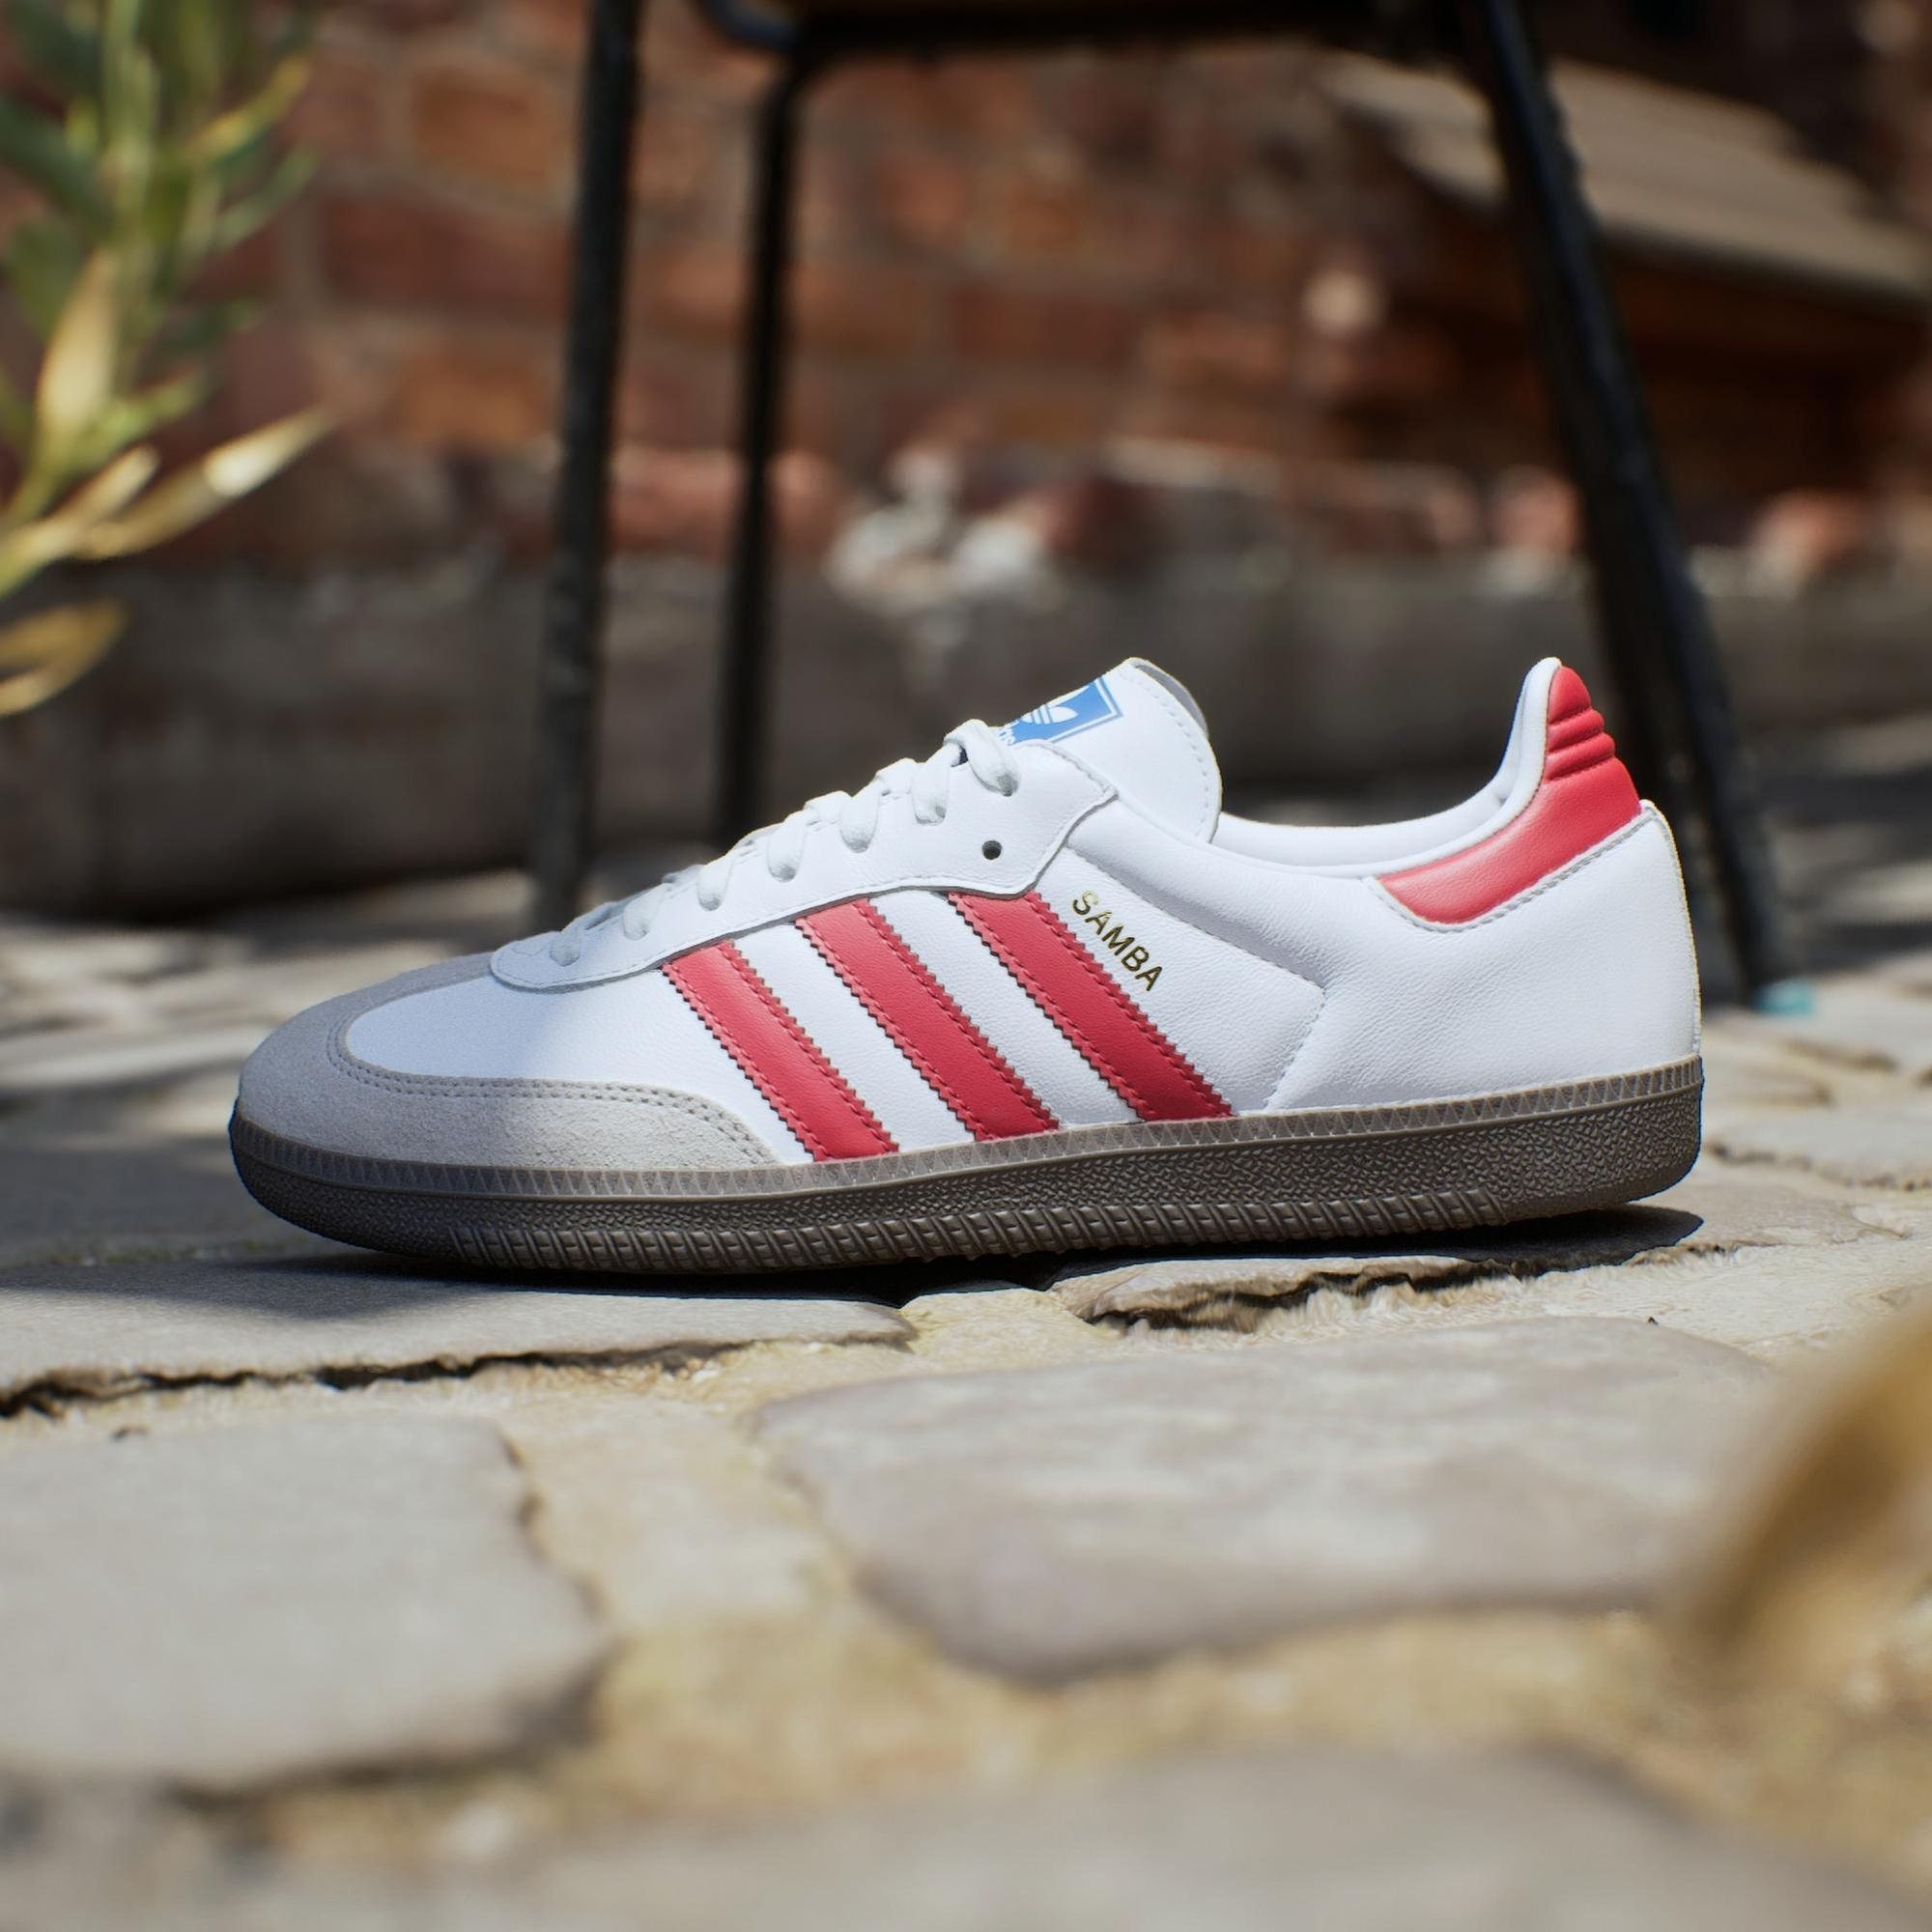 The adidas Samba OG is Available Now in 